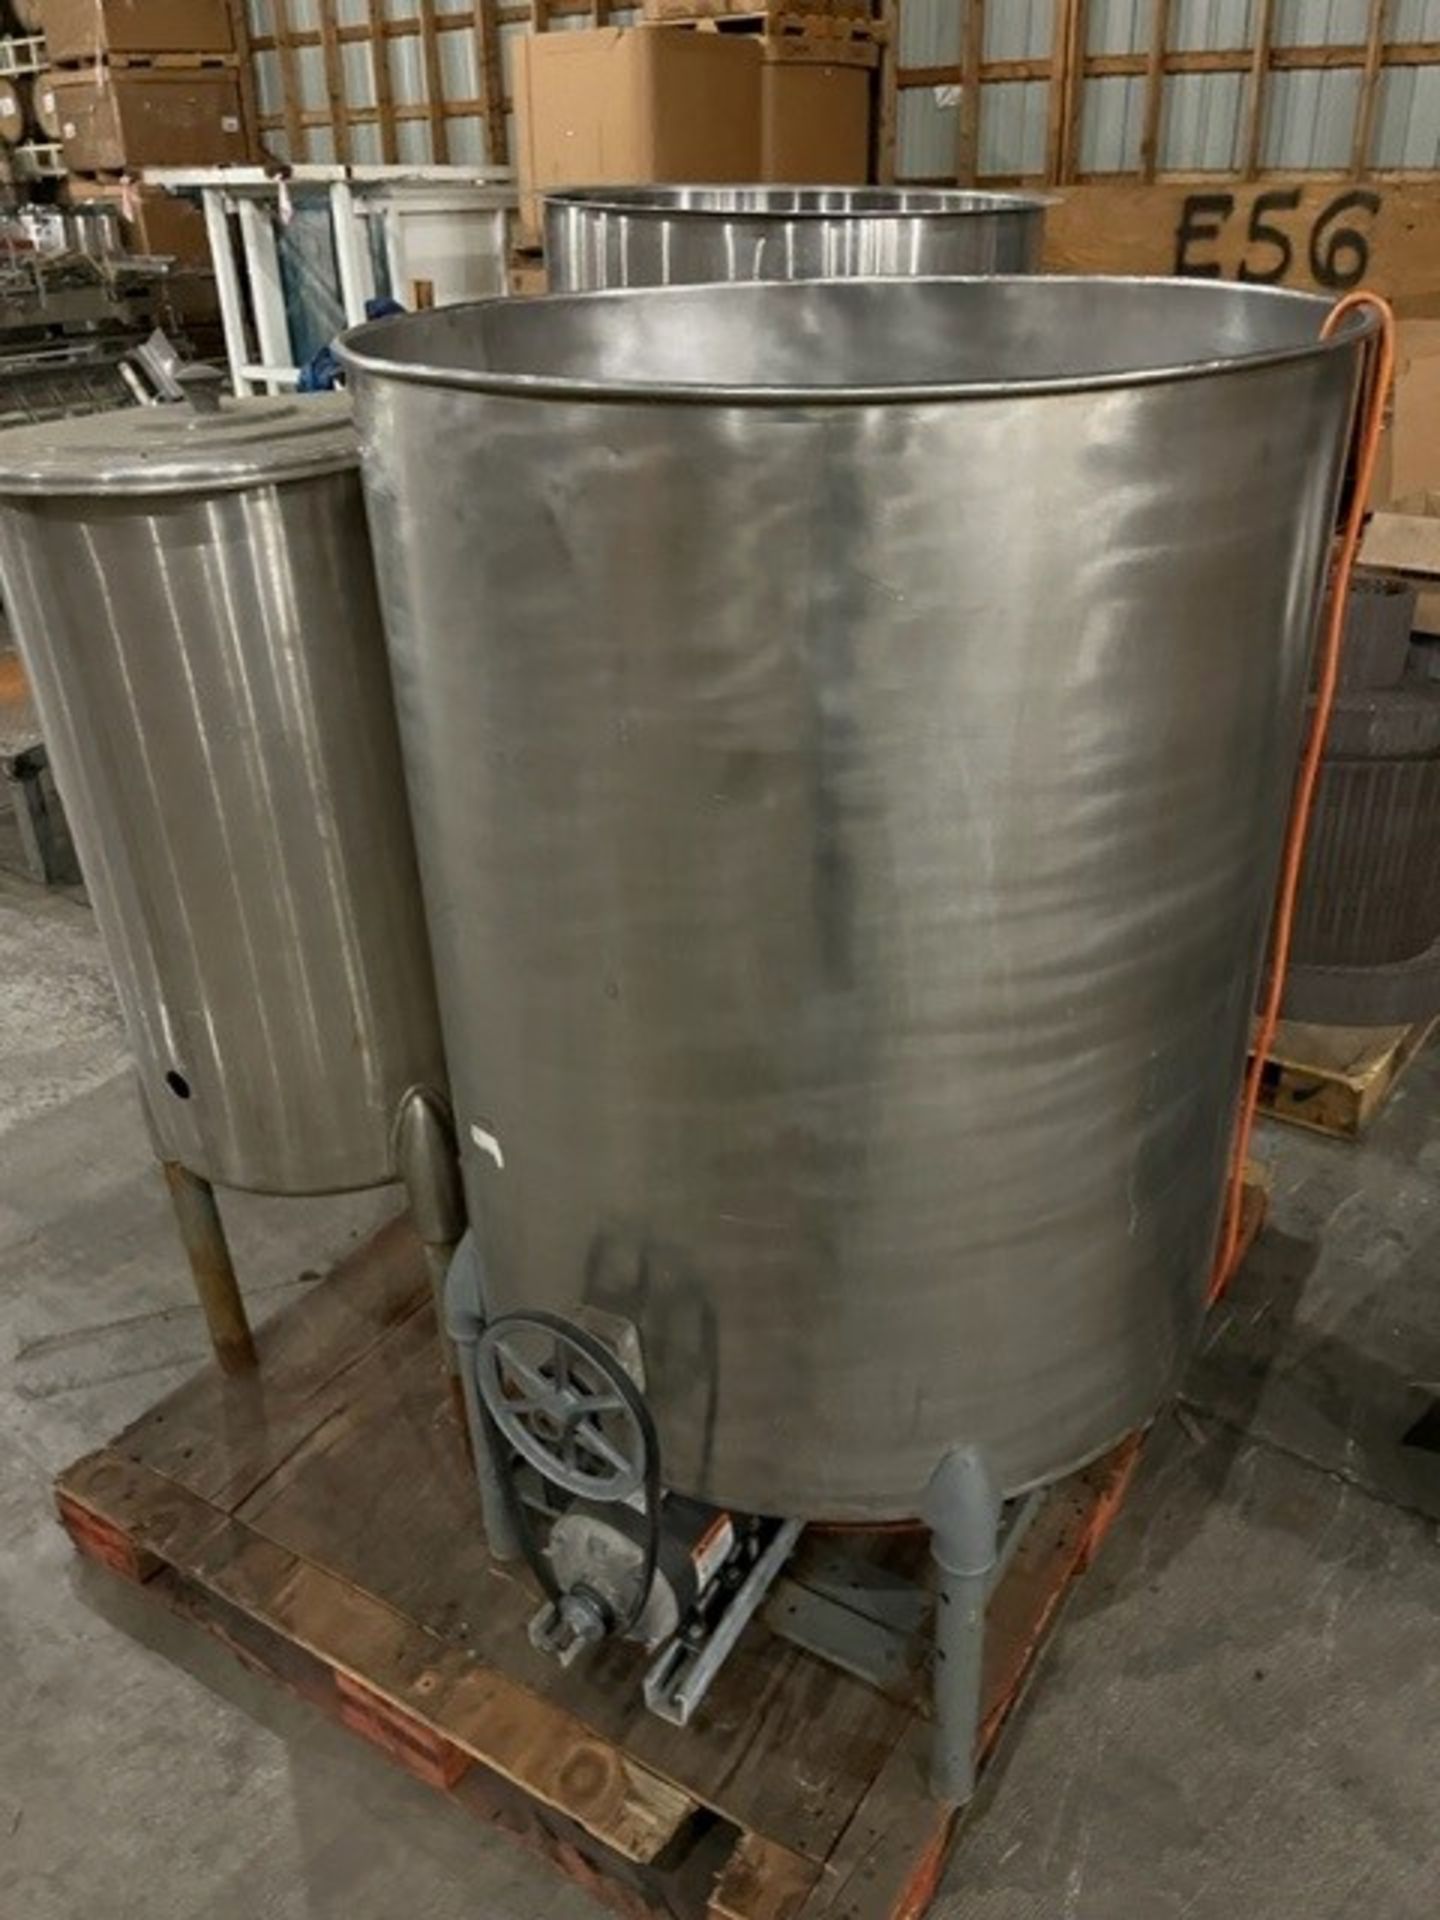 Consignment Item - located in Breese IL: Small mixing tank with motor